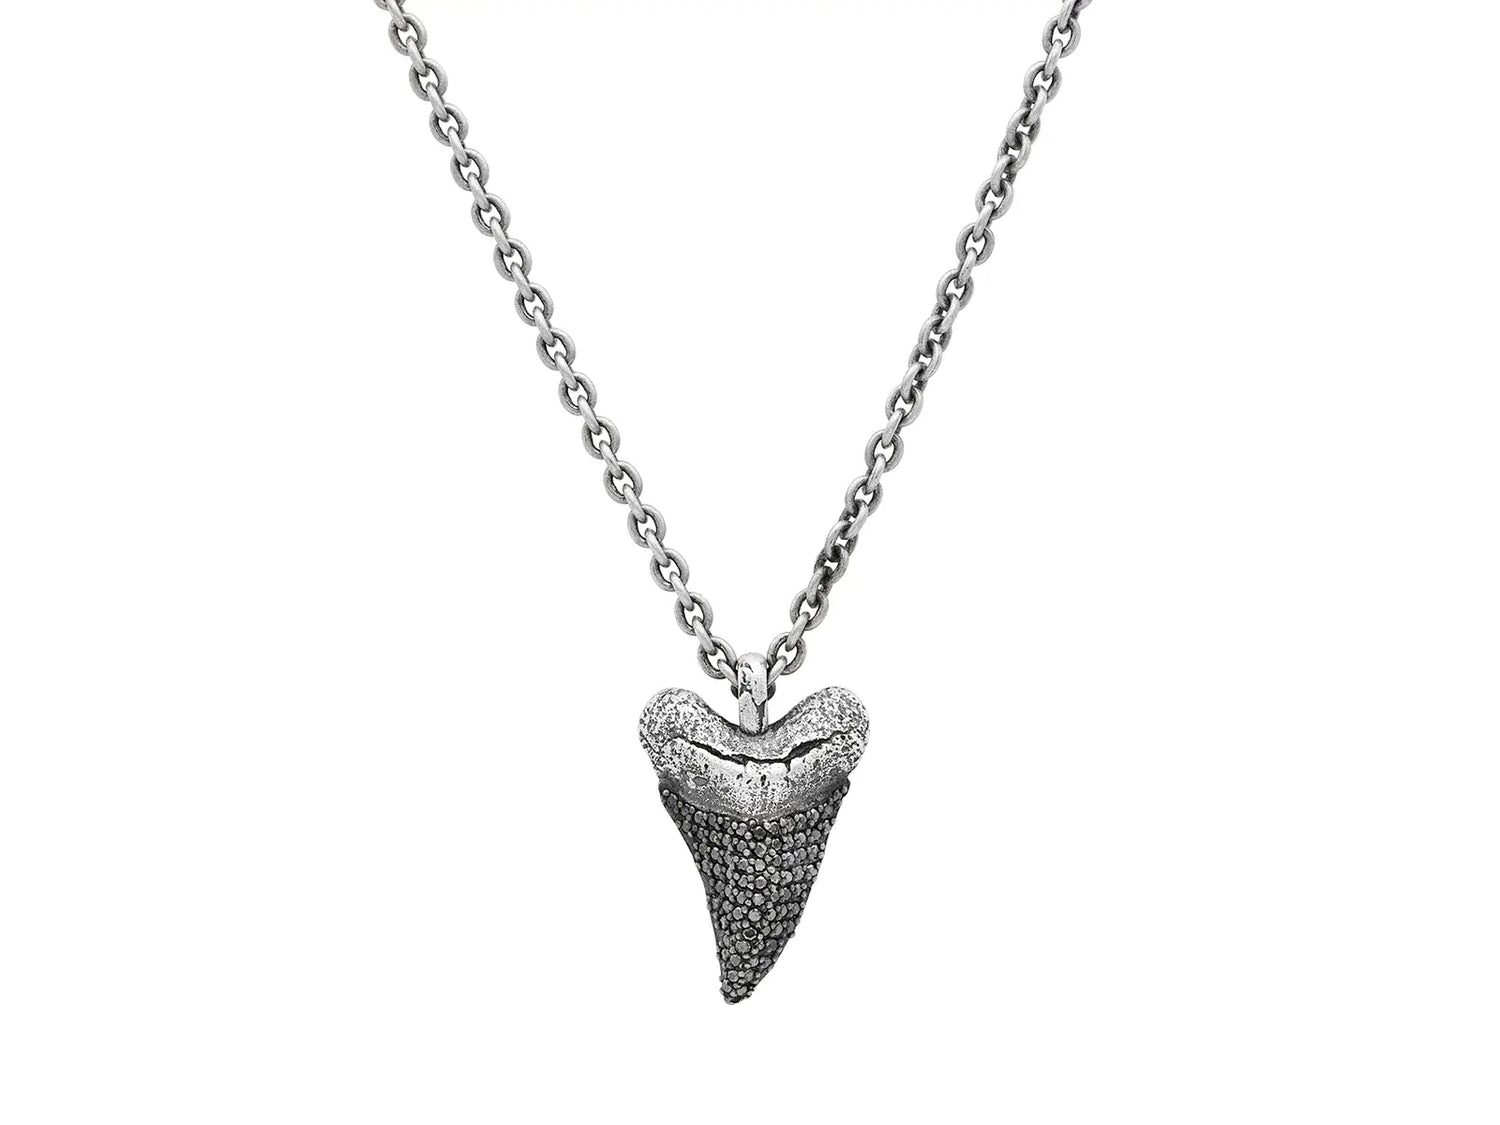 Necklace, Silver w/ 18mm shark tooth with 1.10mm round brilliant cut black diamonds, Ctw:0.44, 24" silver chain with silver fold over skull clasp - Squash Blossom Vail